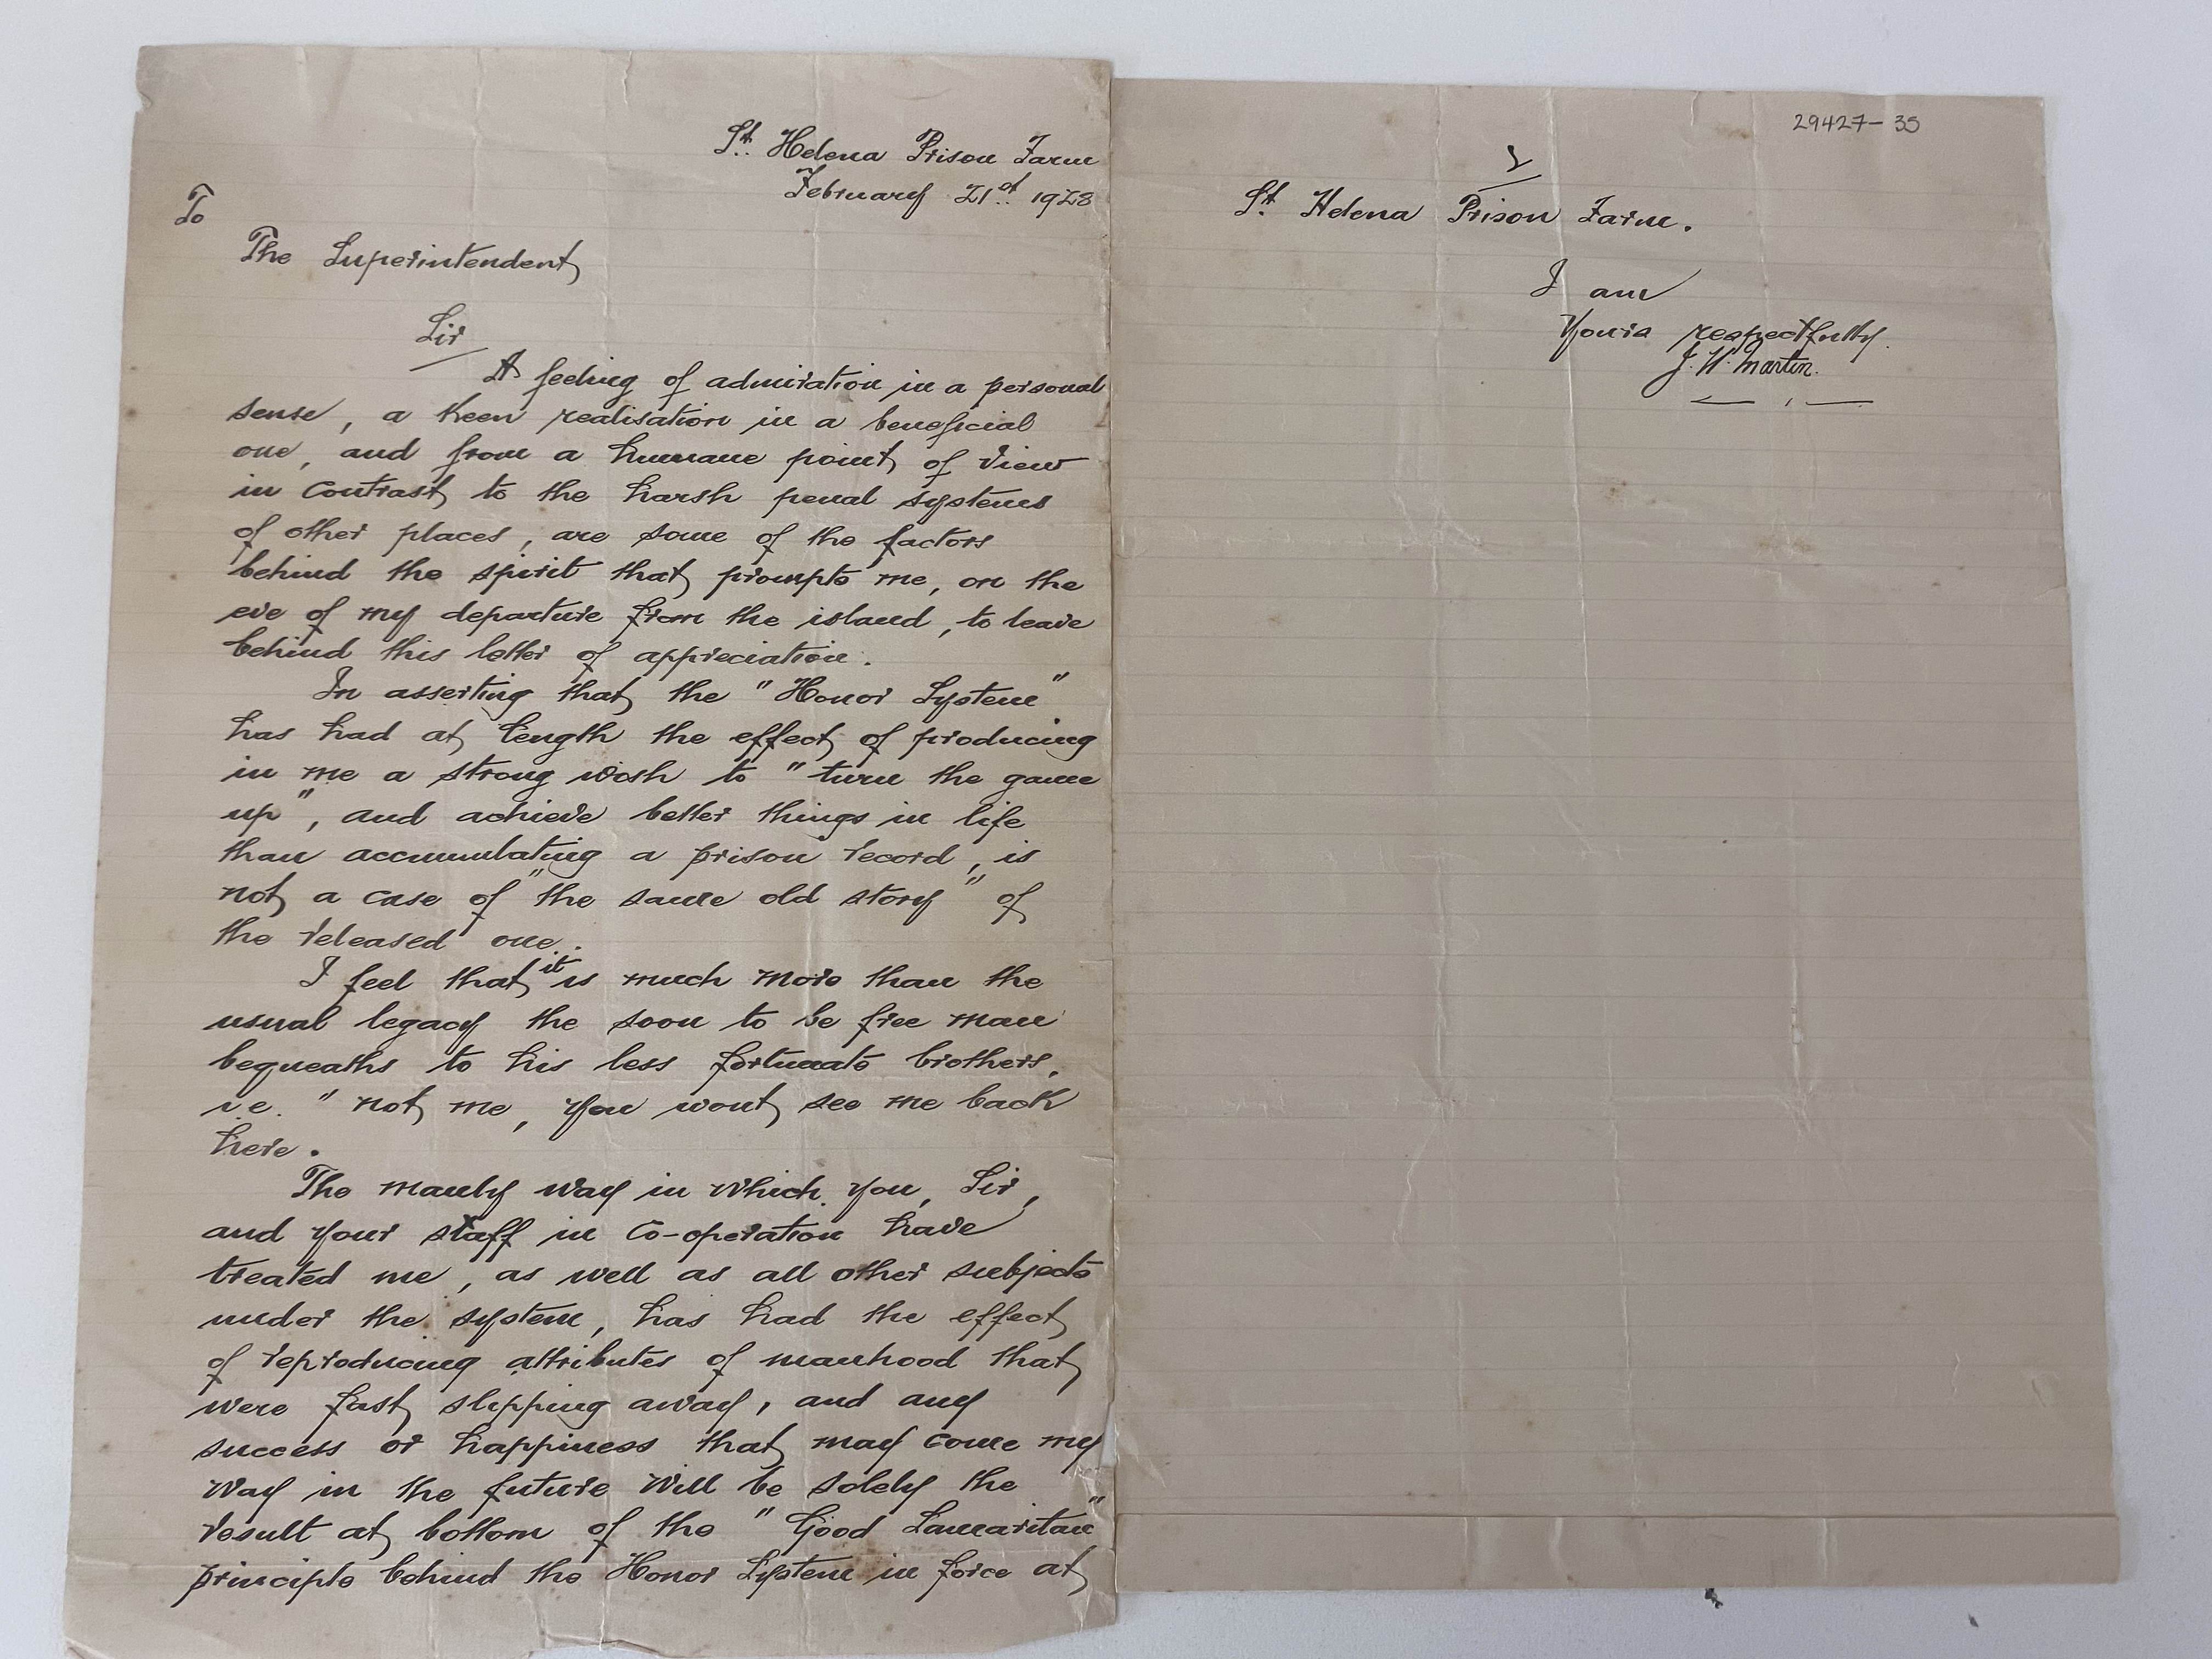 Letters that sent to acting superintendent Patrick Roche by prisoners to express the gratitude for the honour system and the time they served as St Helena Island Prison Farm, February 1928.